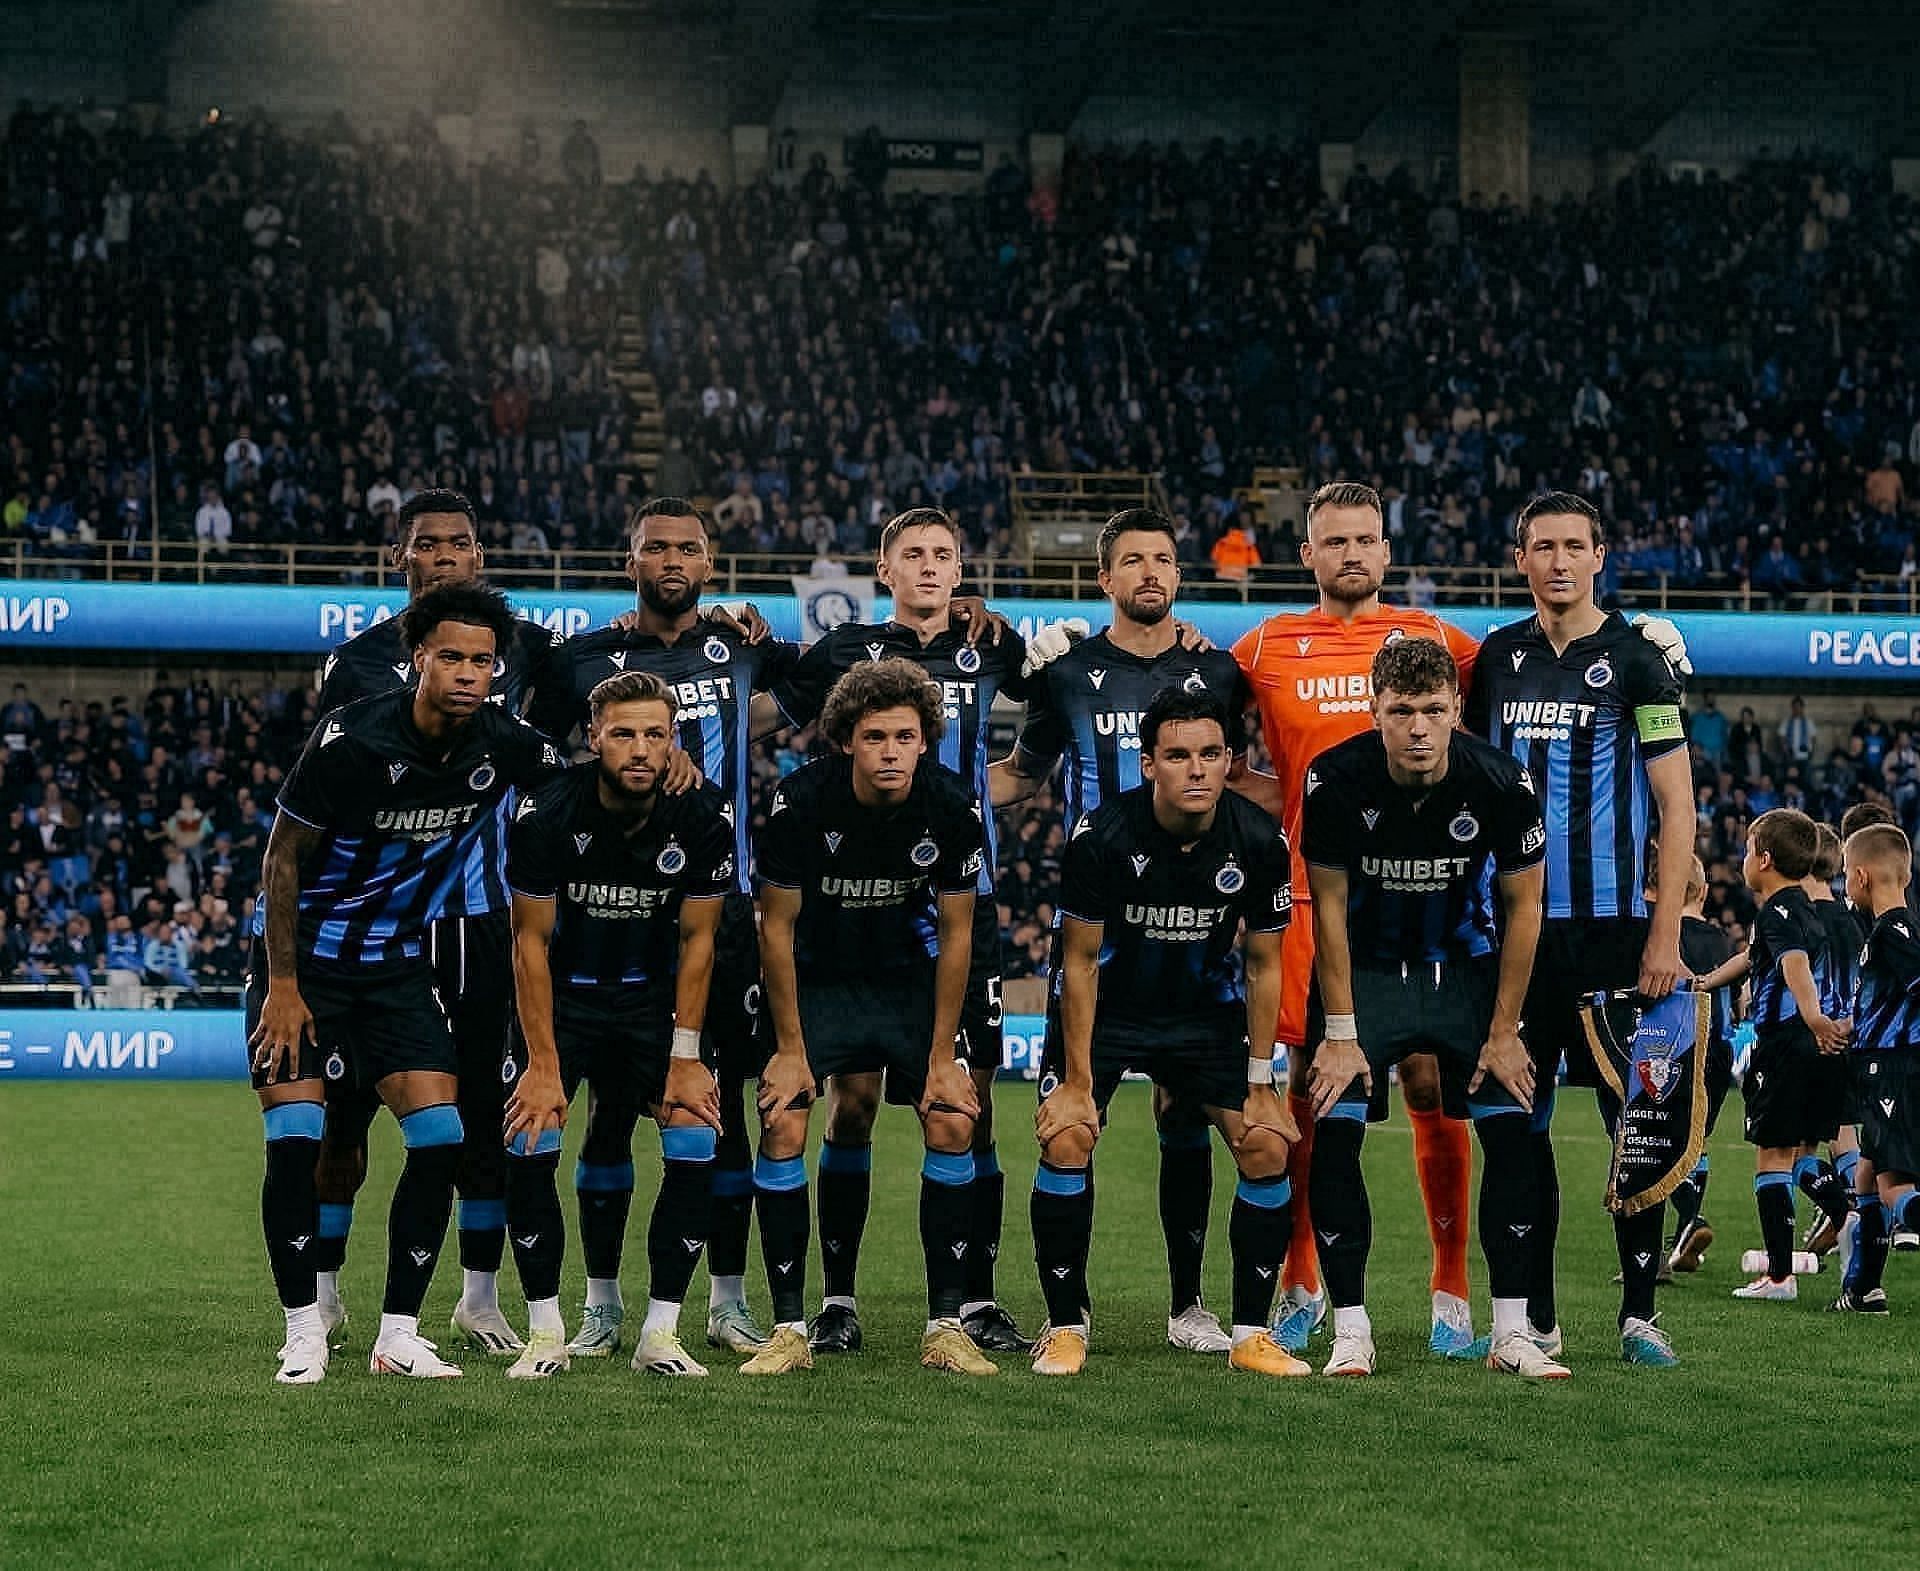 Club Brugge will host ZW on Wednesday 